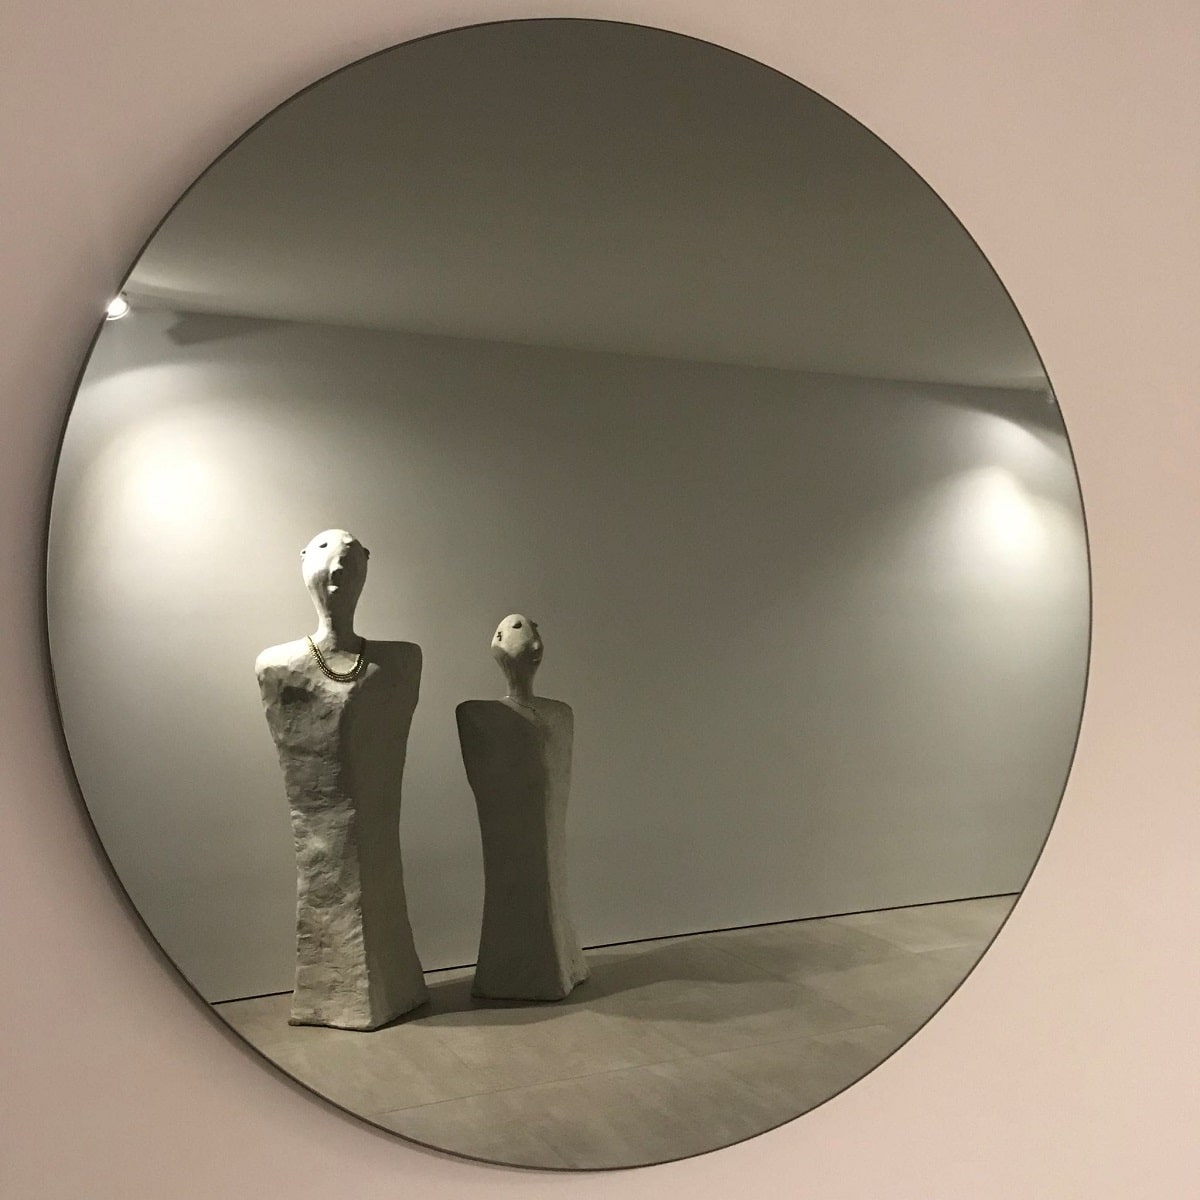 Home automation Brighton lovely circle mirror with two stone statues of people in the mirror